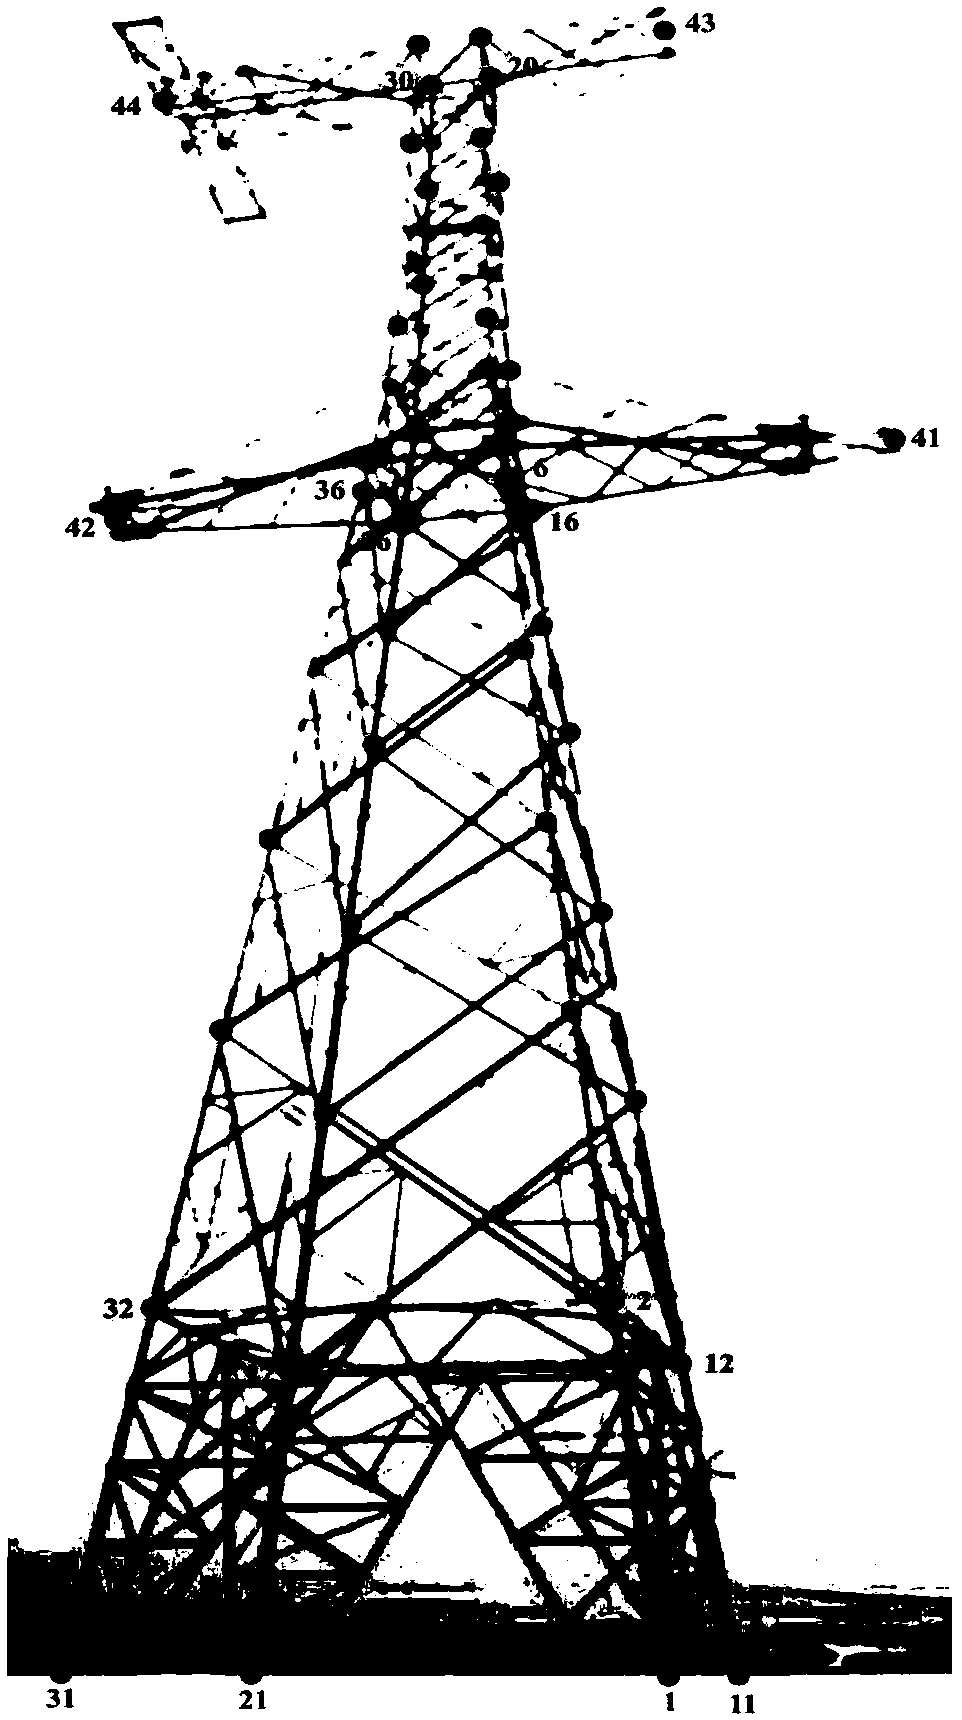 A method for selecting monitoring points for testing mechanical characteristics of transmission towers